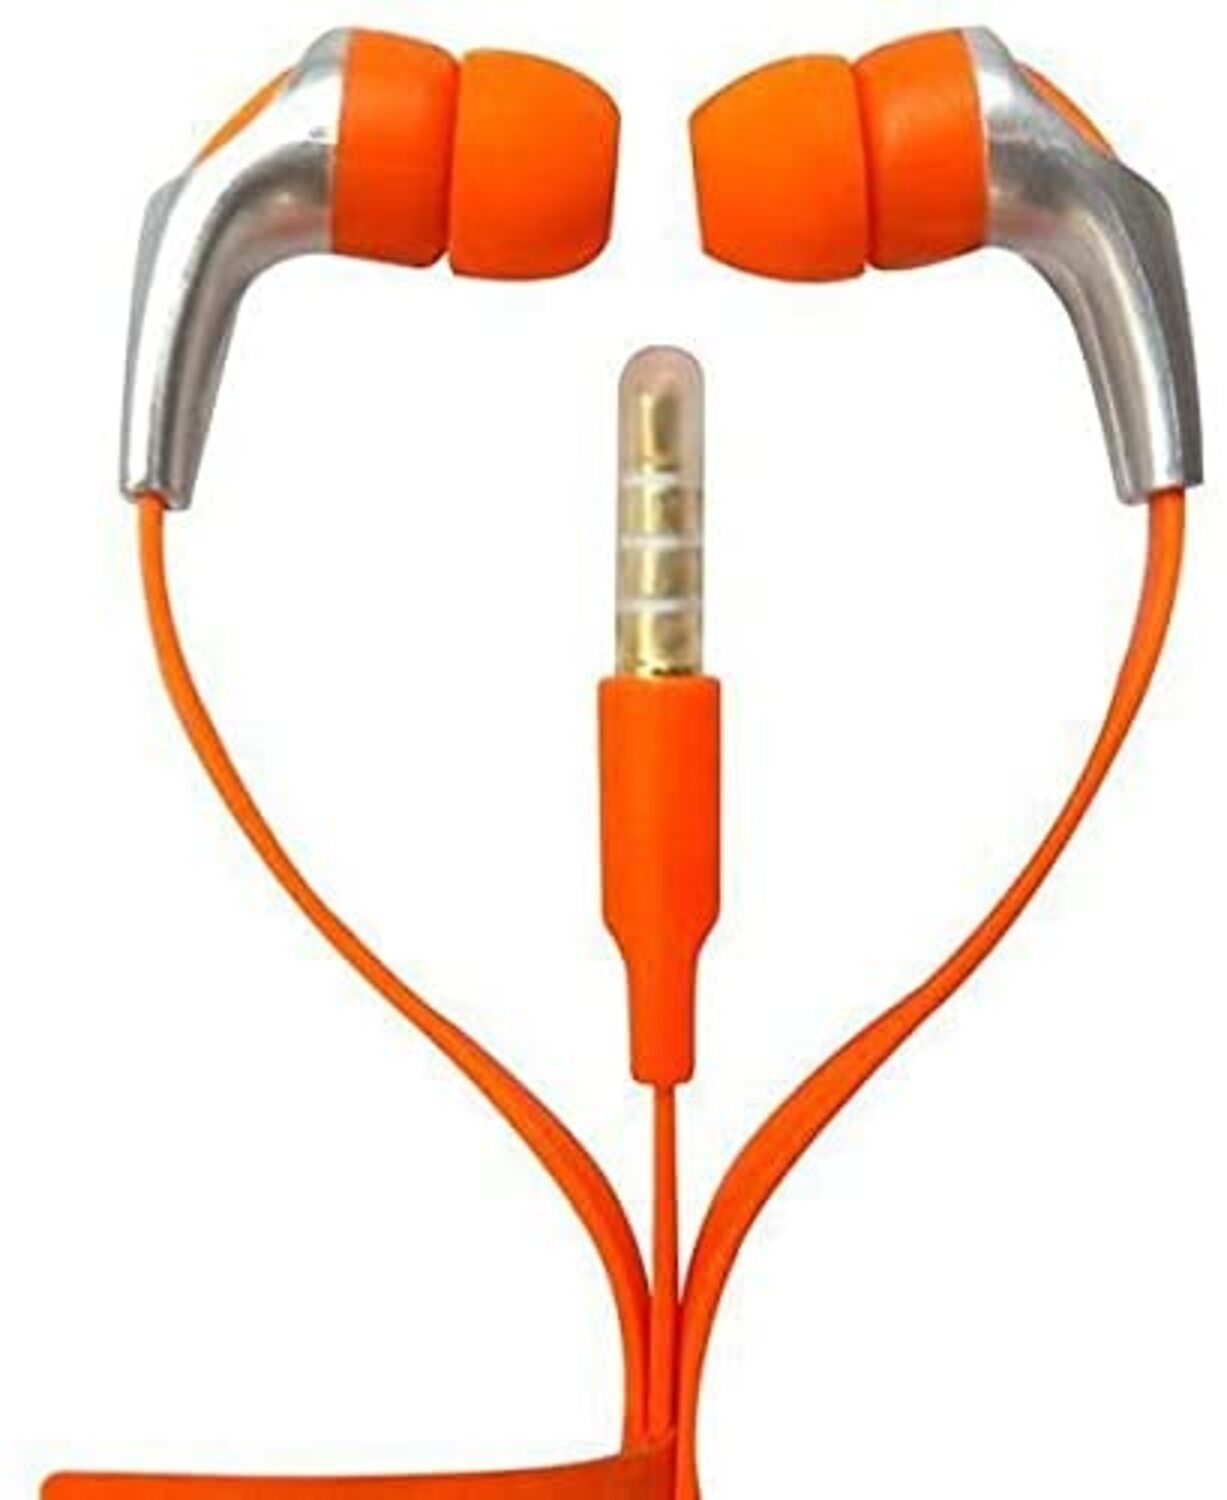 Yison CX330 - Stereo Wired In- Ear Earphone with Mic - orange